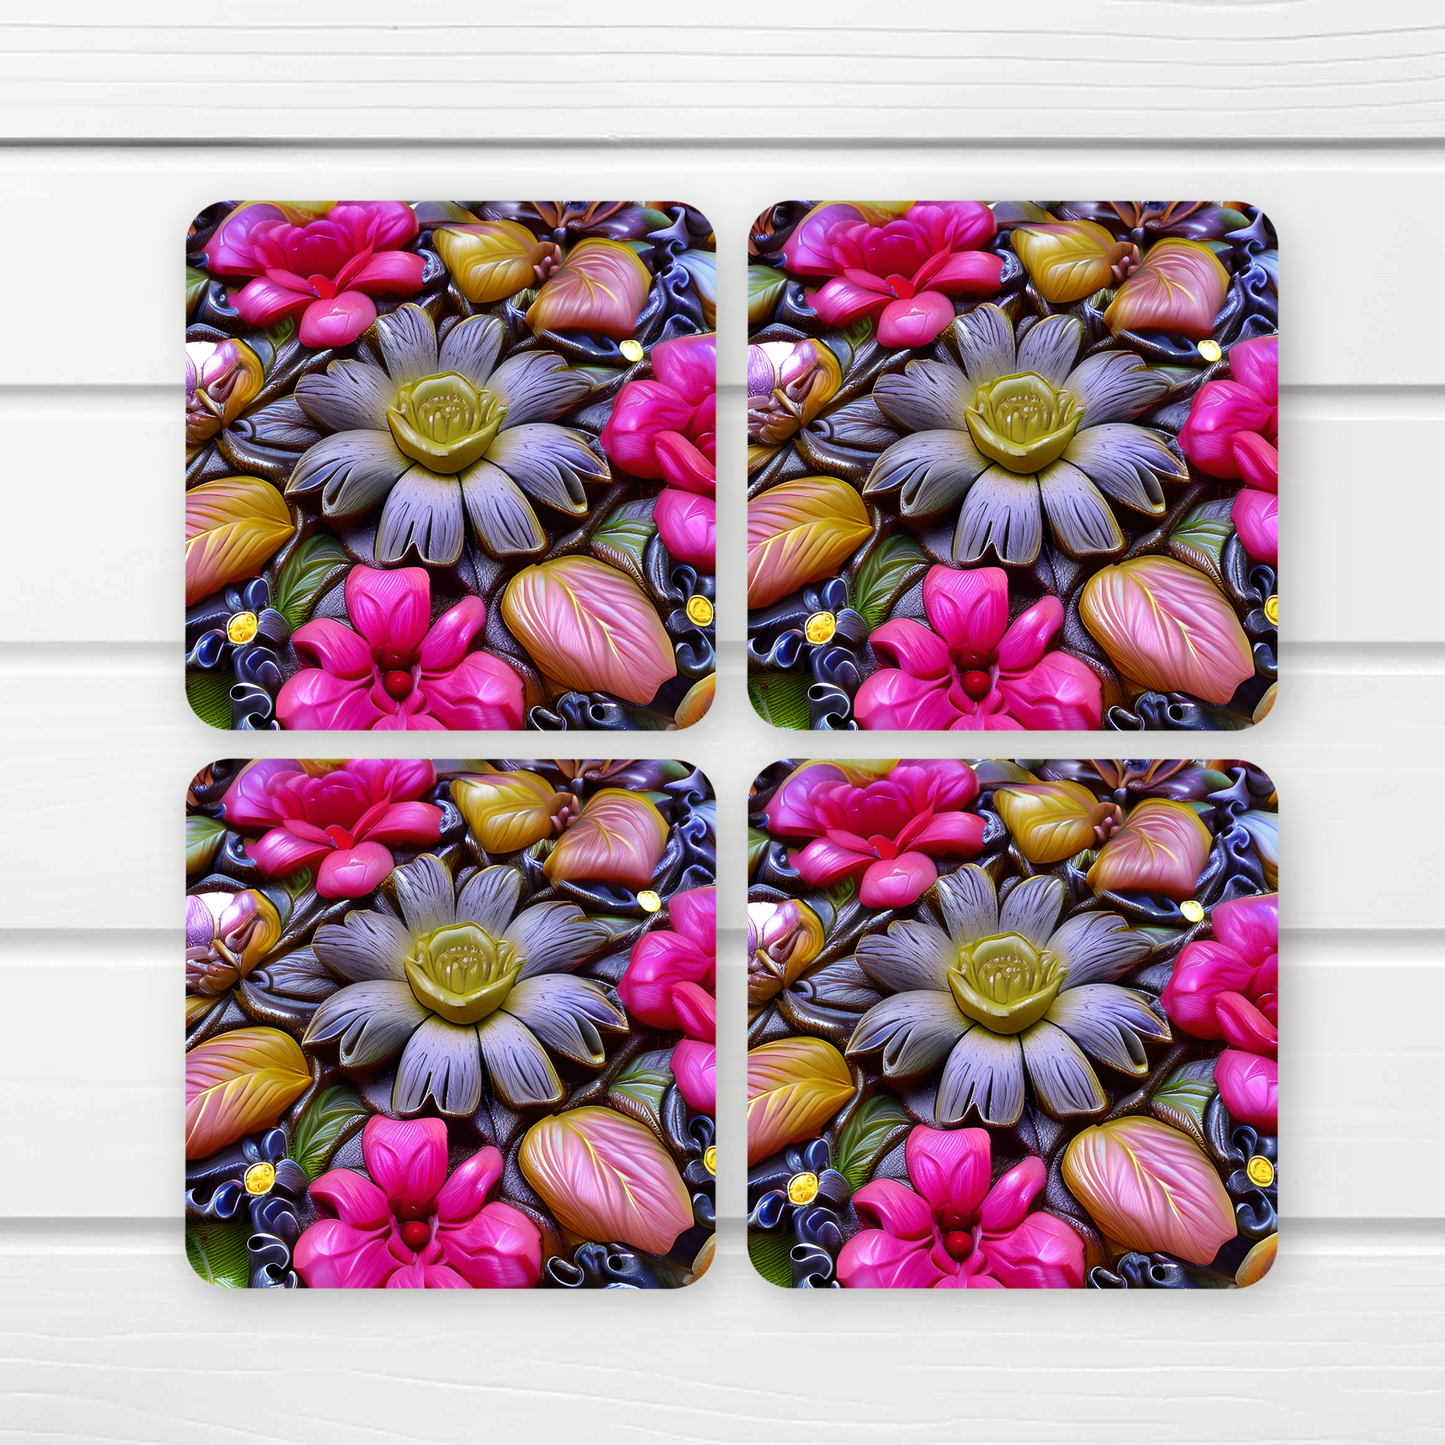 Beautifully Printed 3D Gemstones Wooden Coasters for Stylish Home Décor